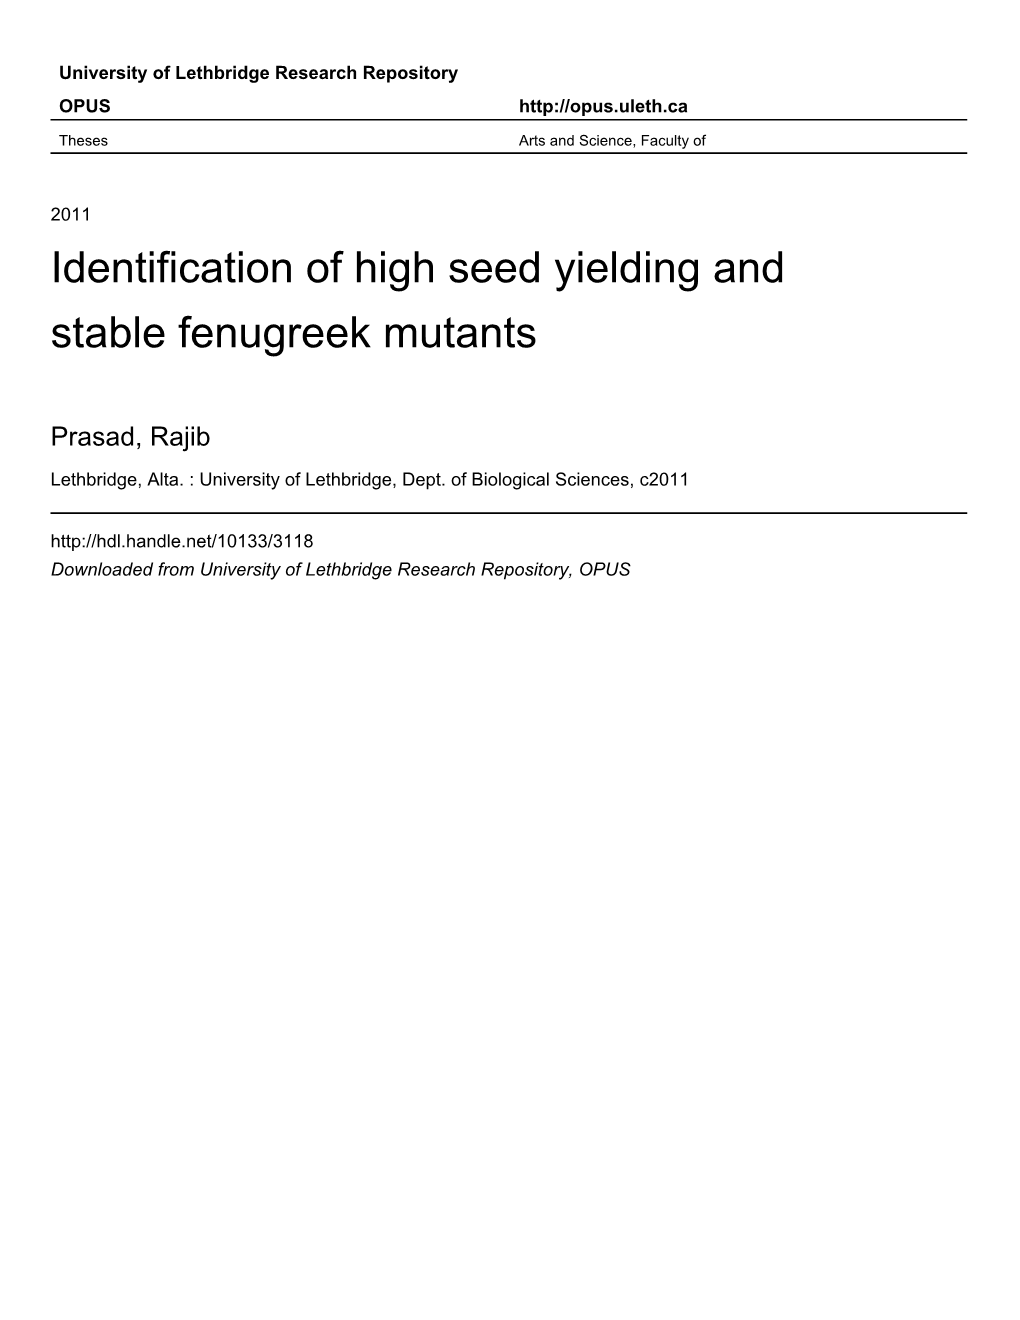 Identification of High Seed Yielding and Stable Fenugreek Mutants